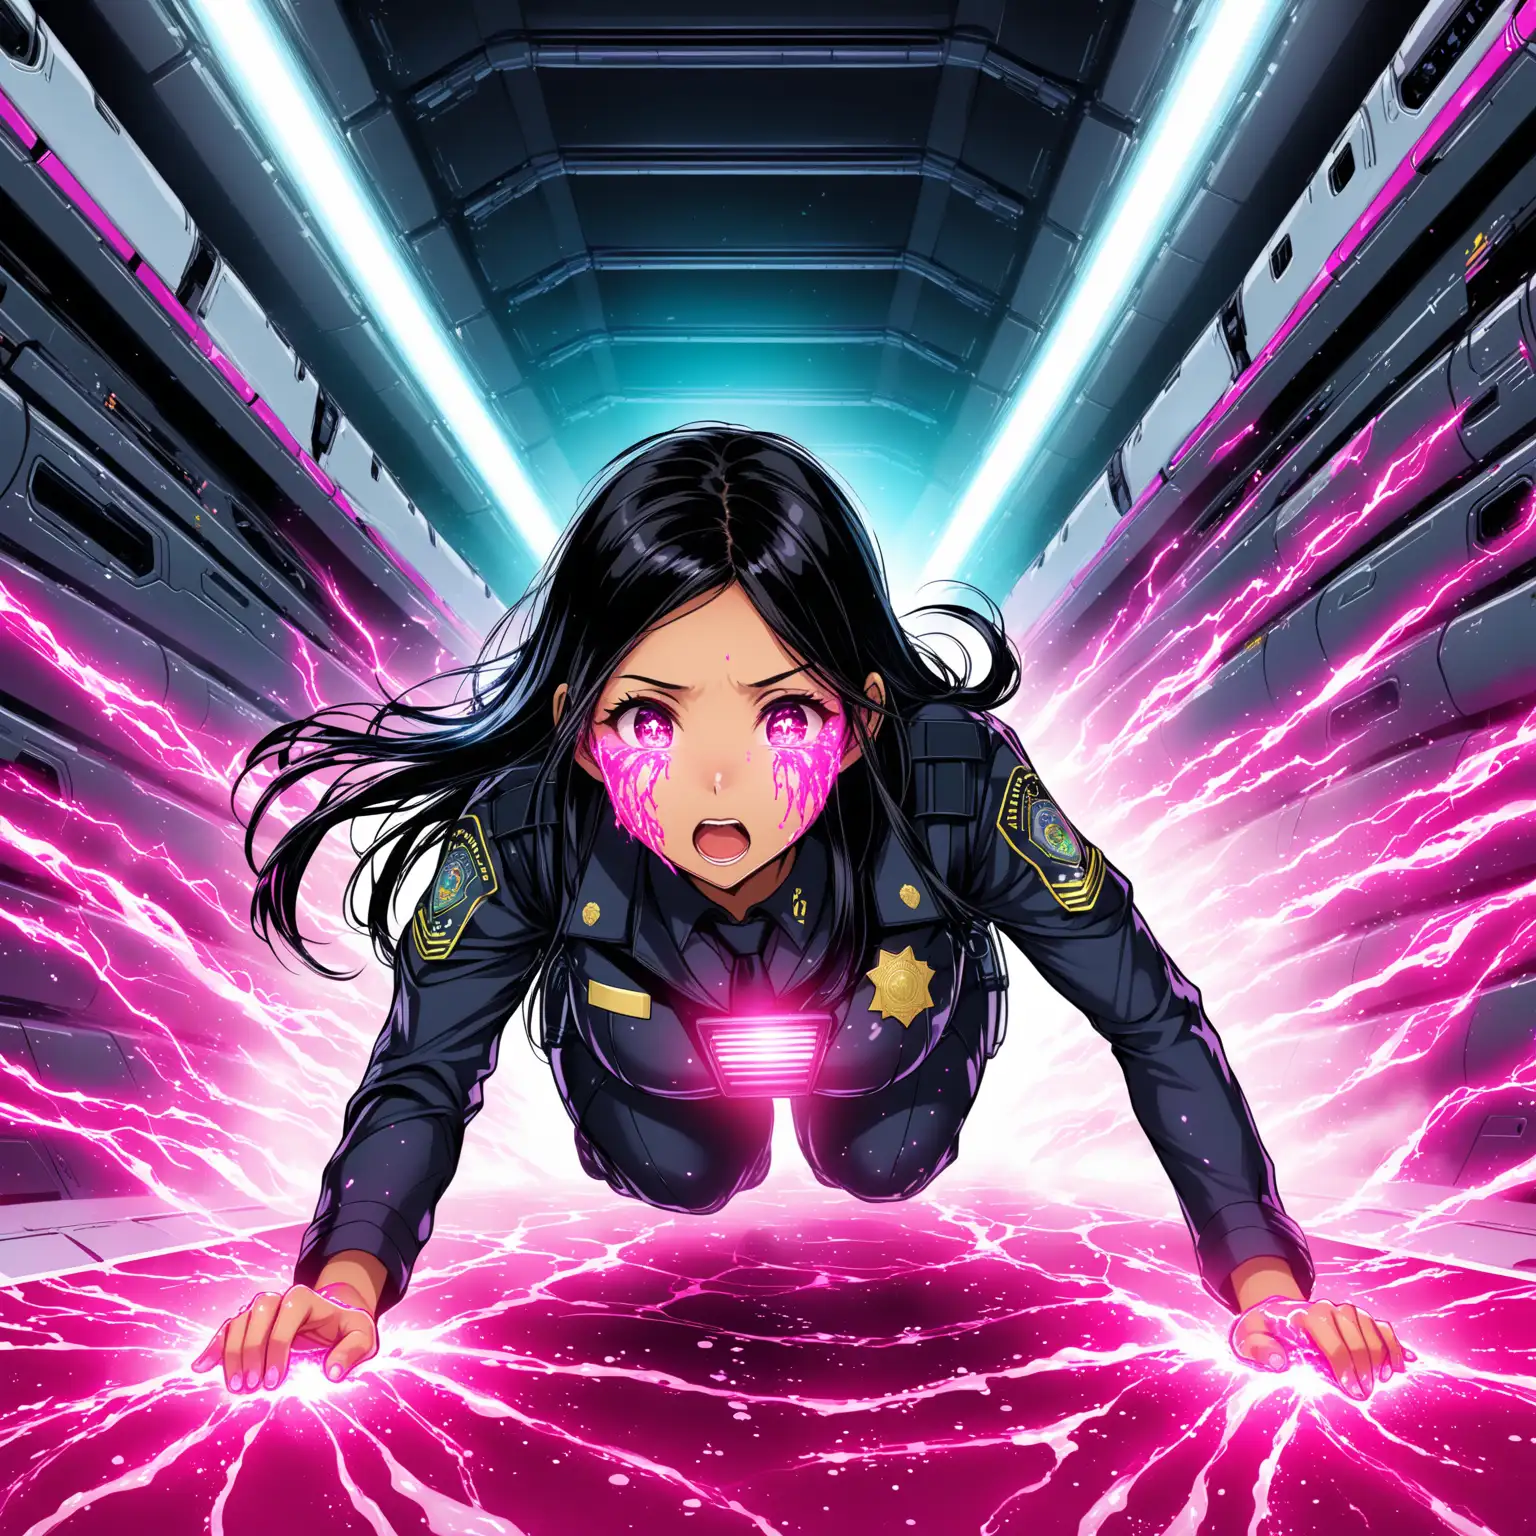 beautiful skinny indonesian police woman crawling, huge breasts, long pinkblack hair, astonished, crawling in spaceship hall, hands smudging  pink goo on face, energetic surge transforming clothes, glowing energy, electronic texture, nanobots